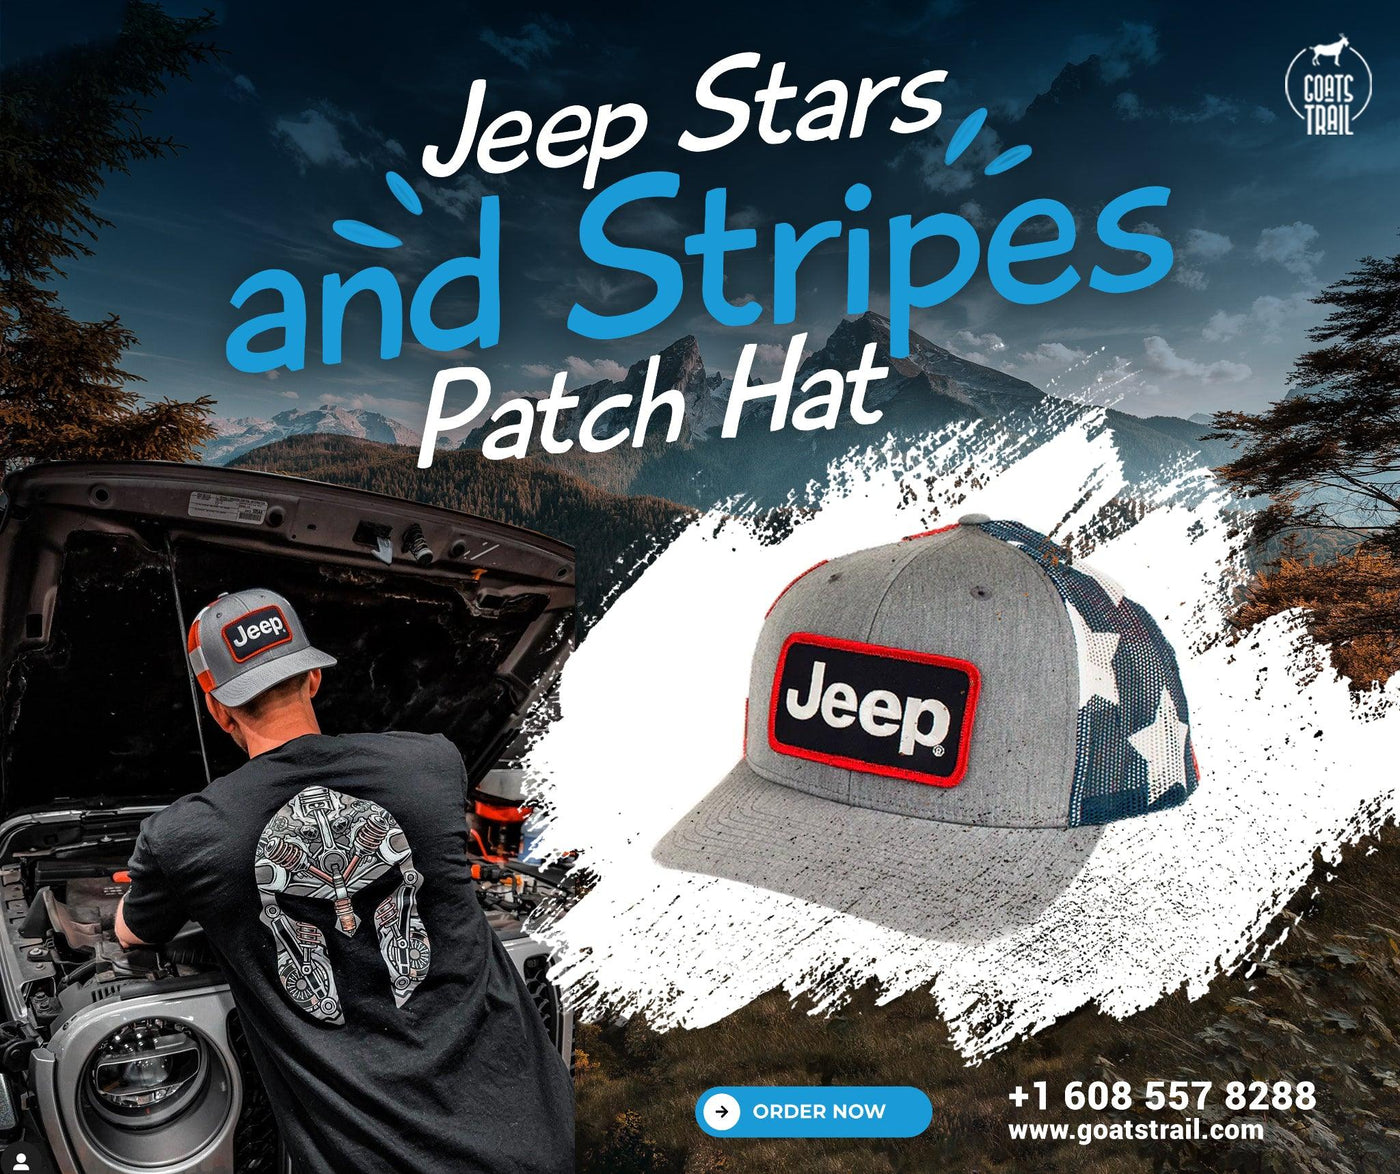 Jeep Stars and Stripes Patch Hat - Goats Trail